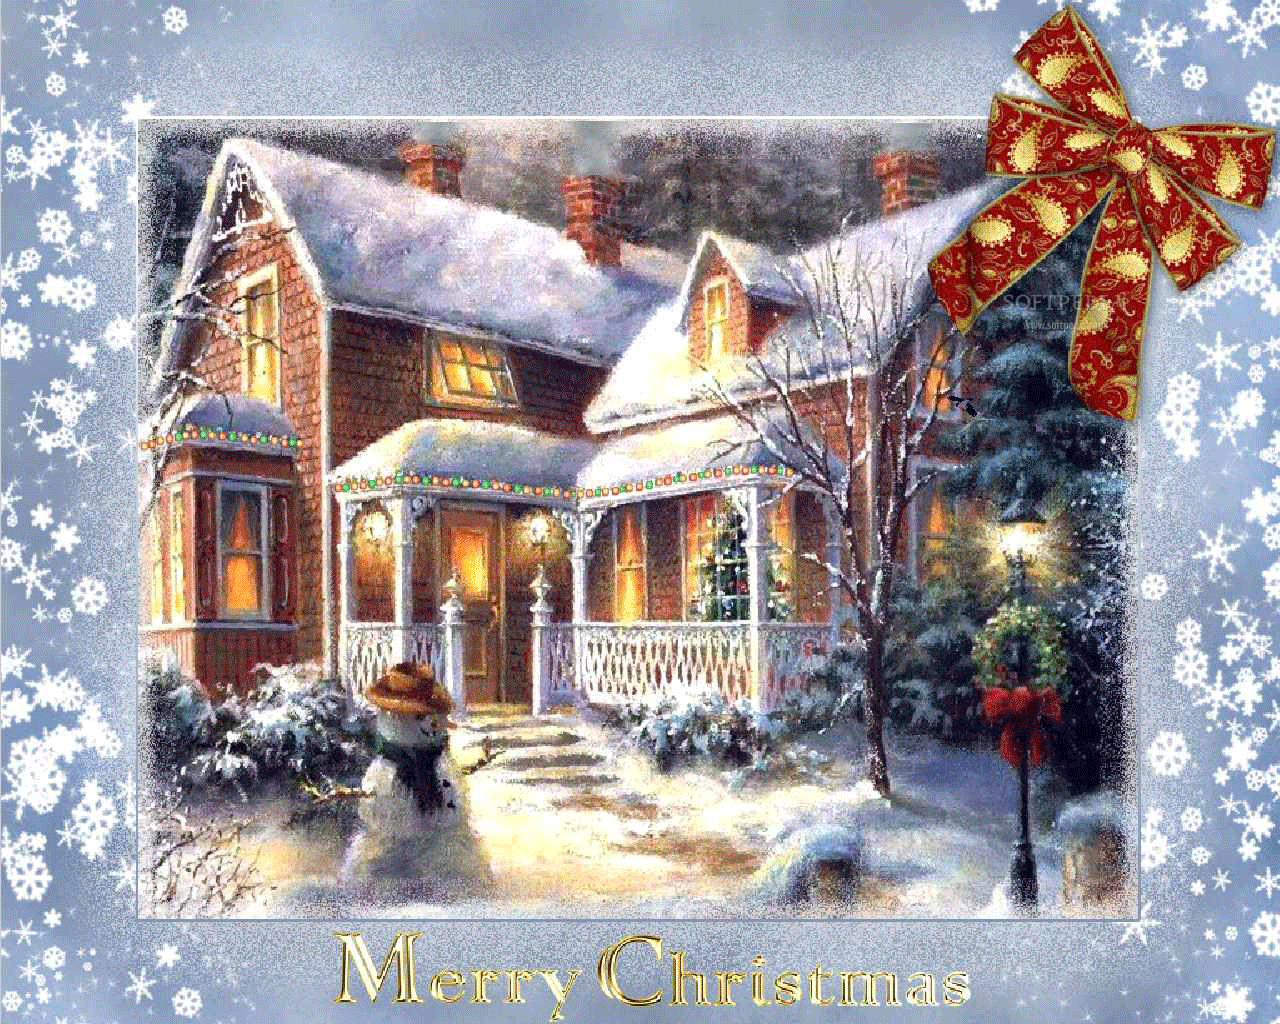 Free Christmas Wallpapers Popular Wallpapers Downloads